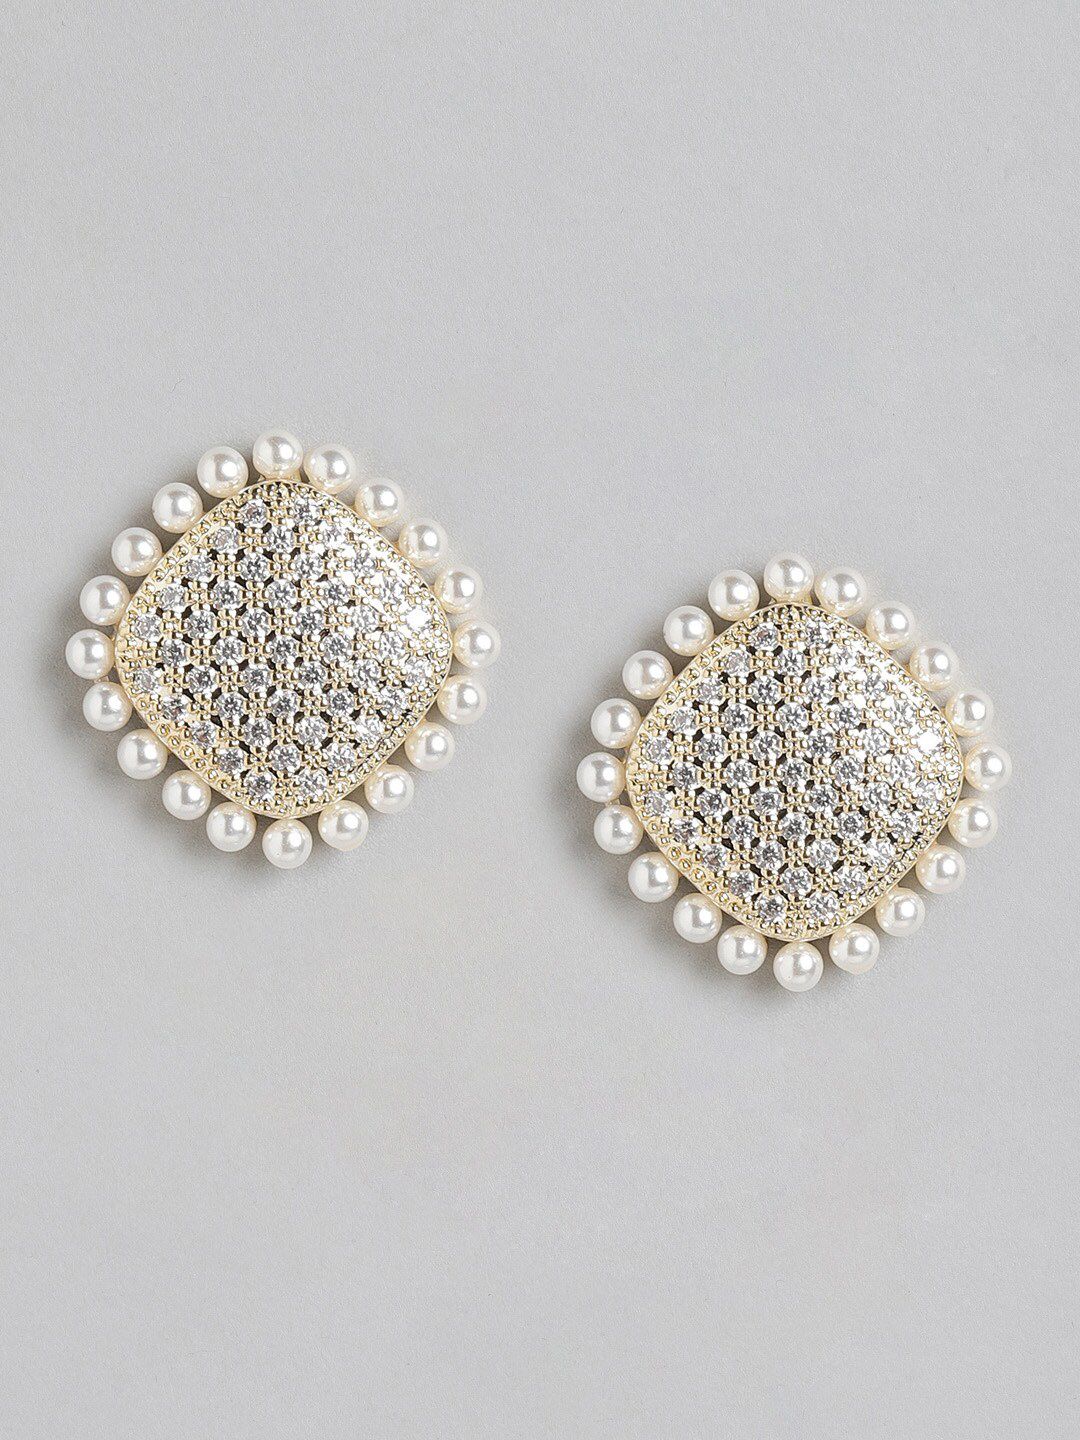 Carlton London Silver-Toned & Off White Floral Studs Earrings Price in India